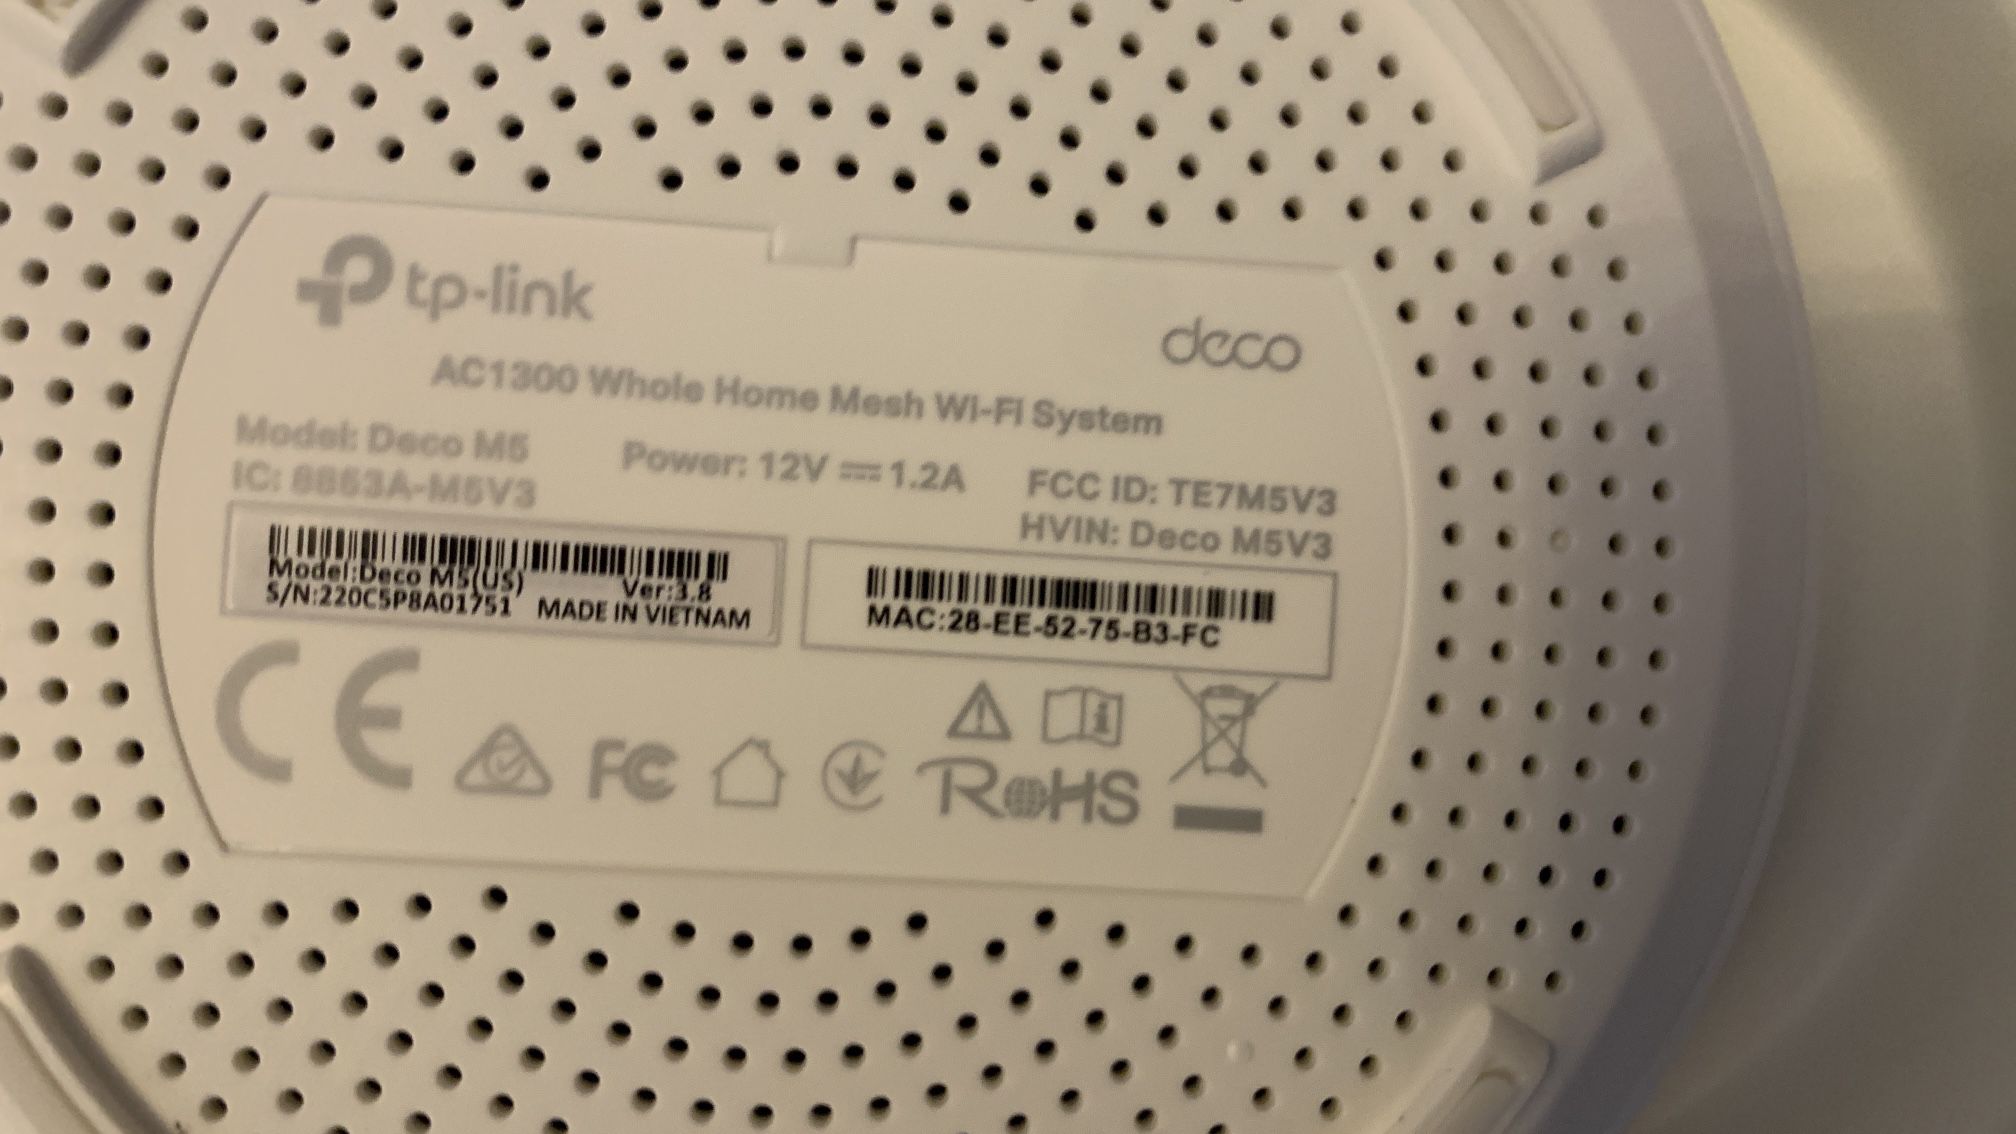 TP-Link Deco Mesh WiFi Router (Deco M5) Dual Band Gigabit Wireless Router, Quad-core CPU, MU-MIMO, HomeCare, Parental Control, Up to 3800 sq. ft. Cove